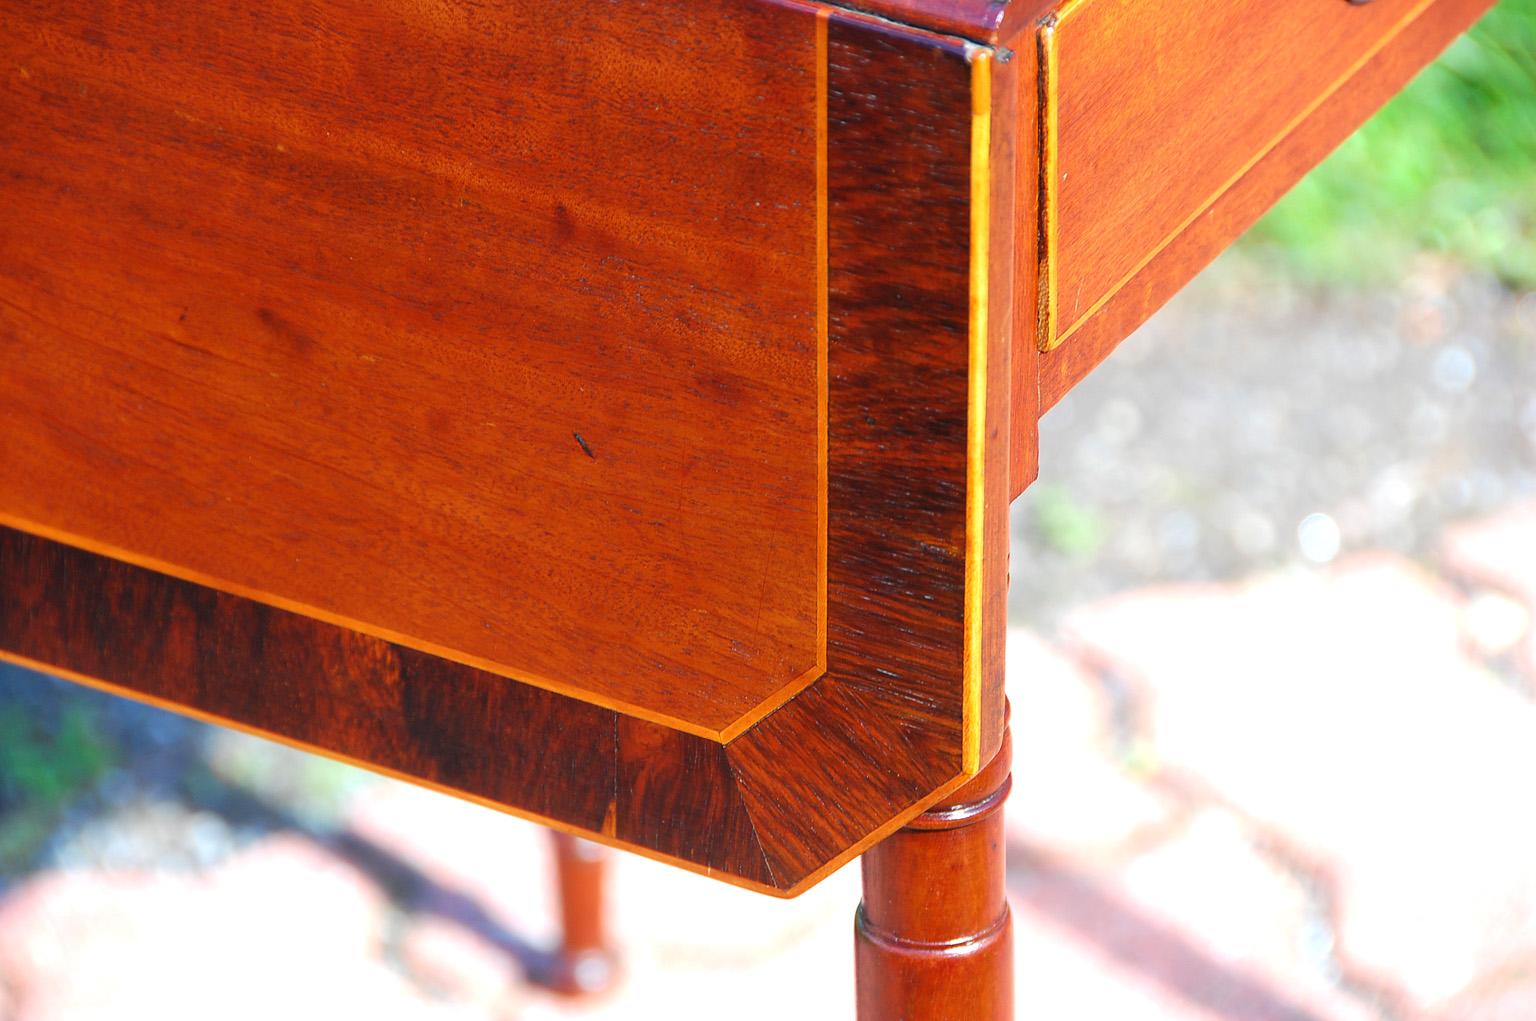 English George III mahogany dropleaf pembroke or side table with elegant turned tapered legs, rosewood crossbanding, satinwood stringing and one drawer. This is an unusual size for a pembroke table, being smaller than most, but quite versatile. It